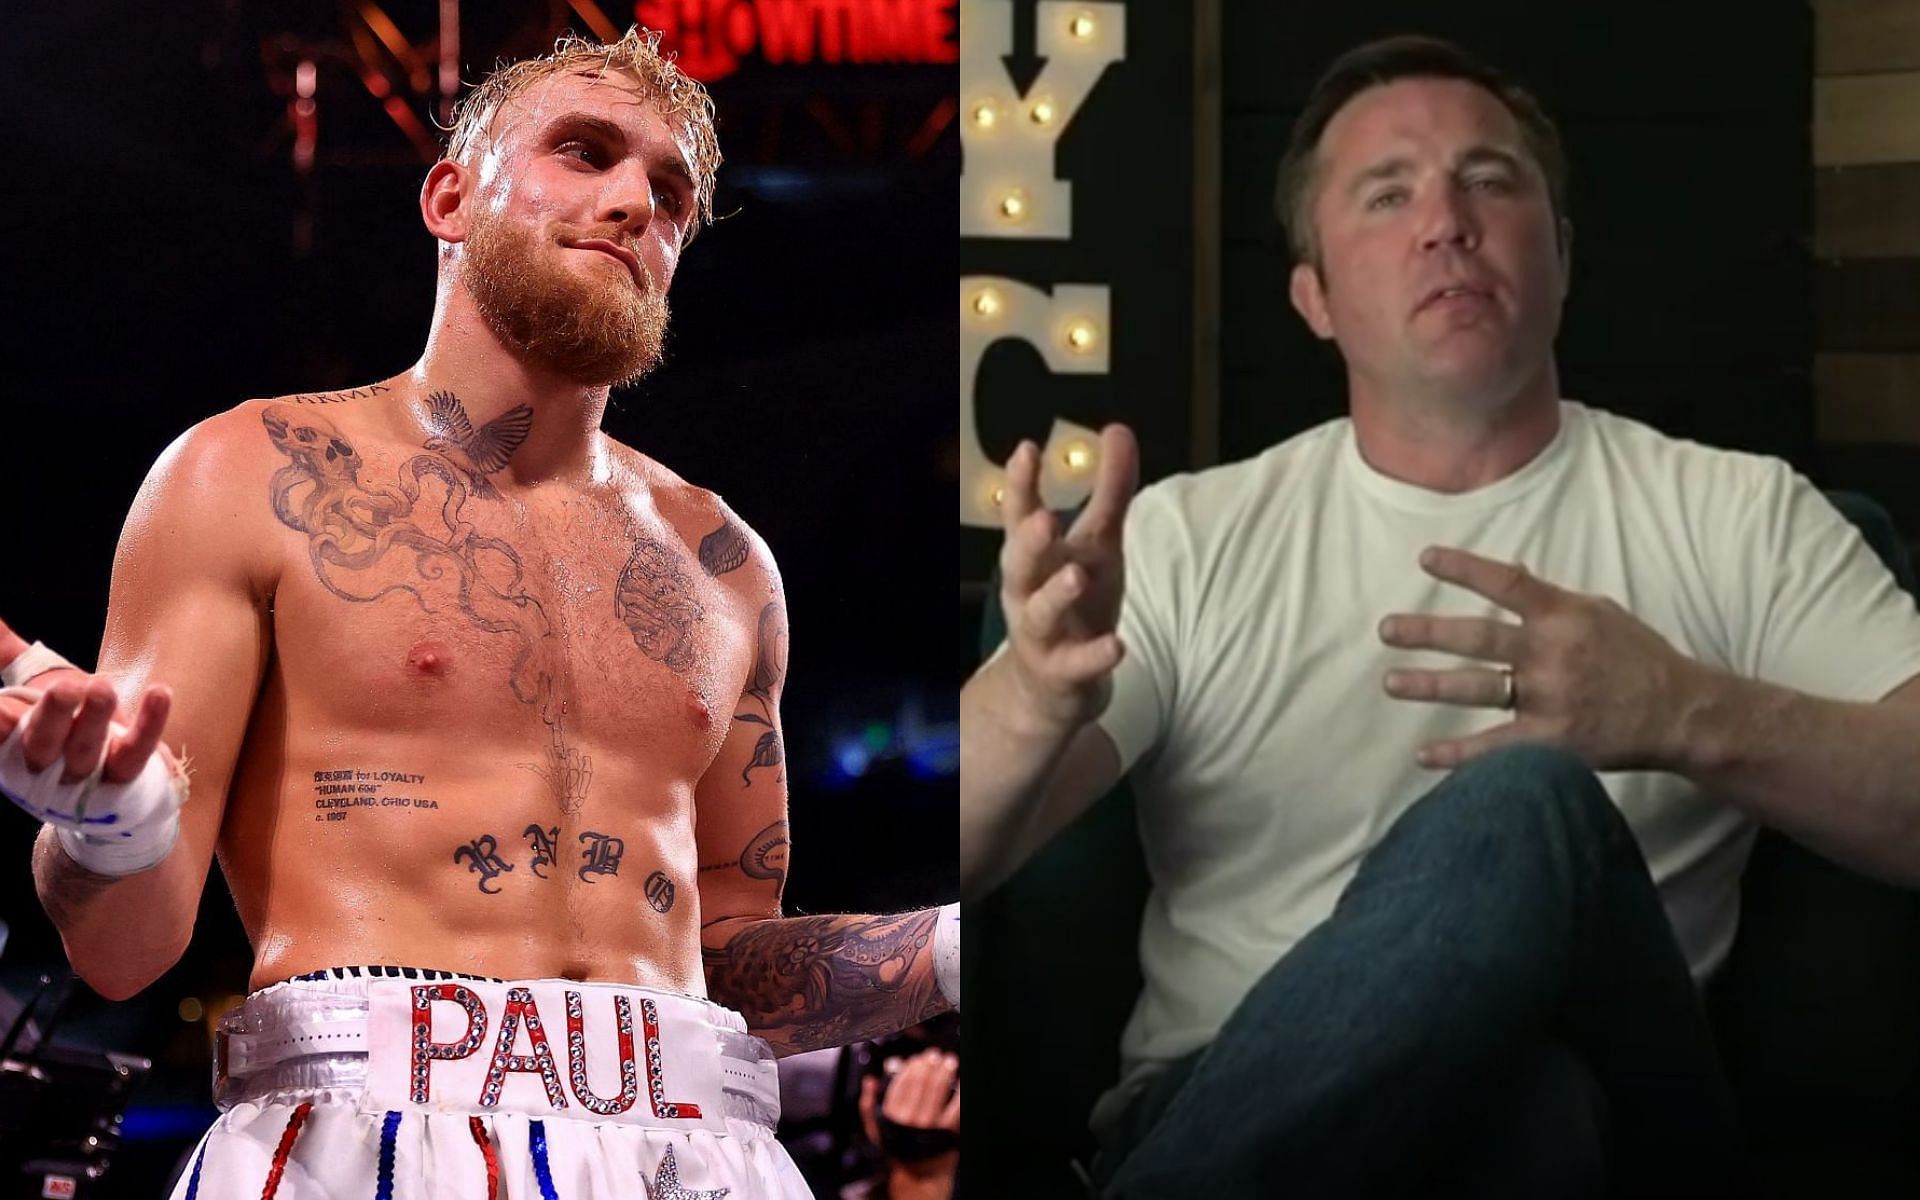 Jake Paul (left) and Chael Sonnen (right) [Right photo via YouTube.com]